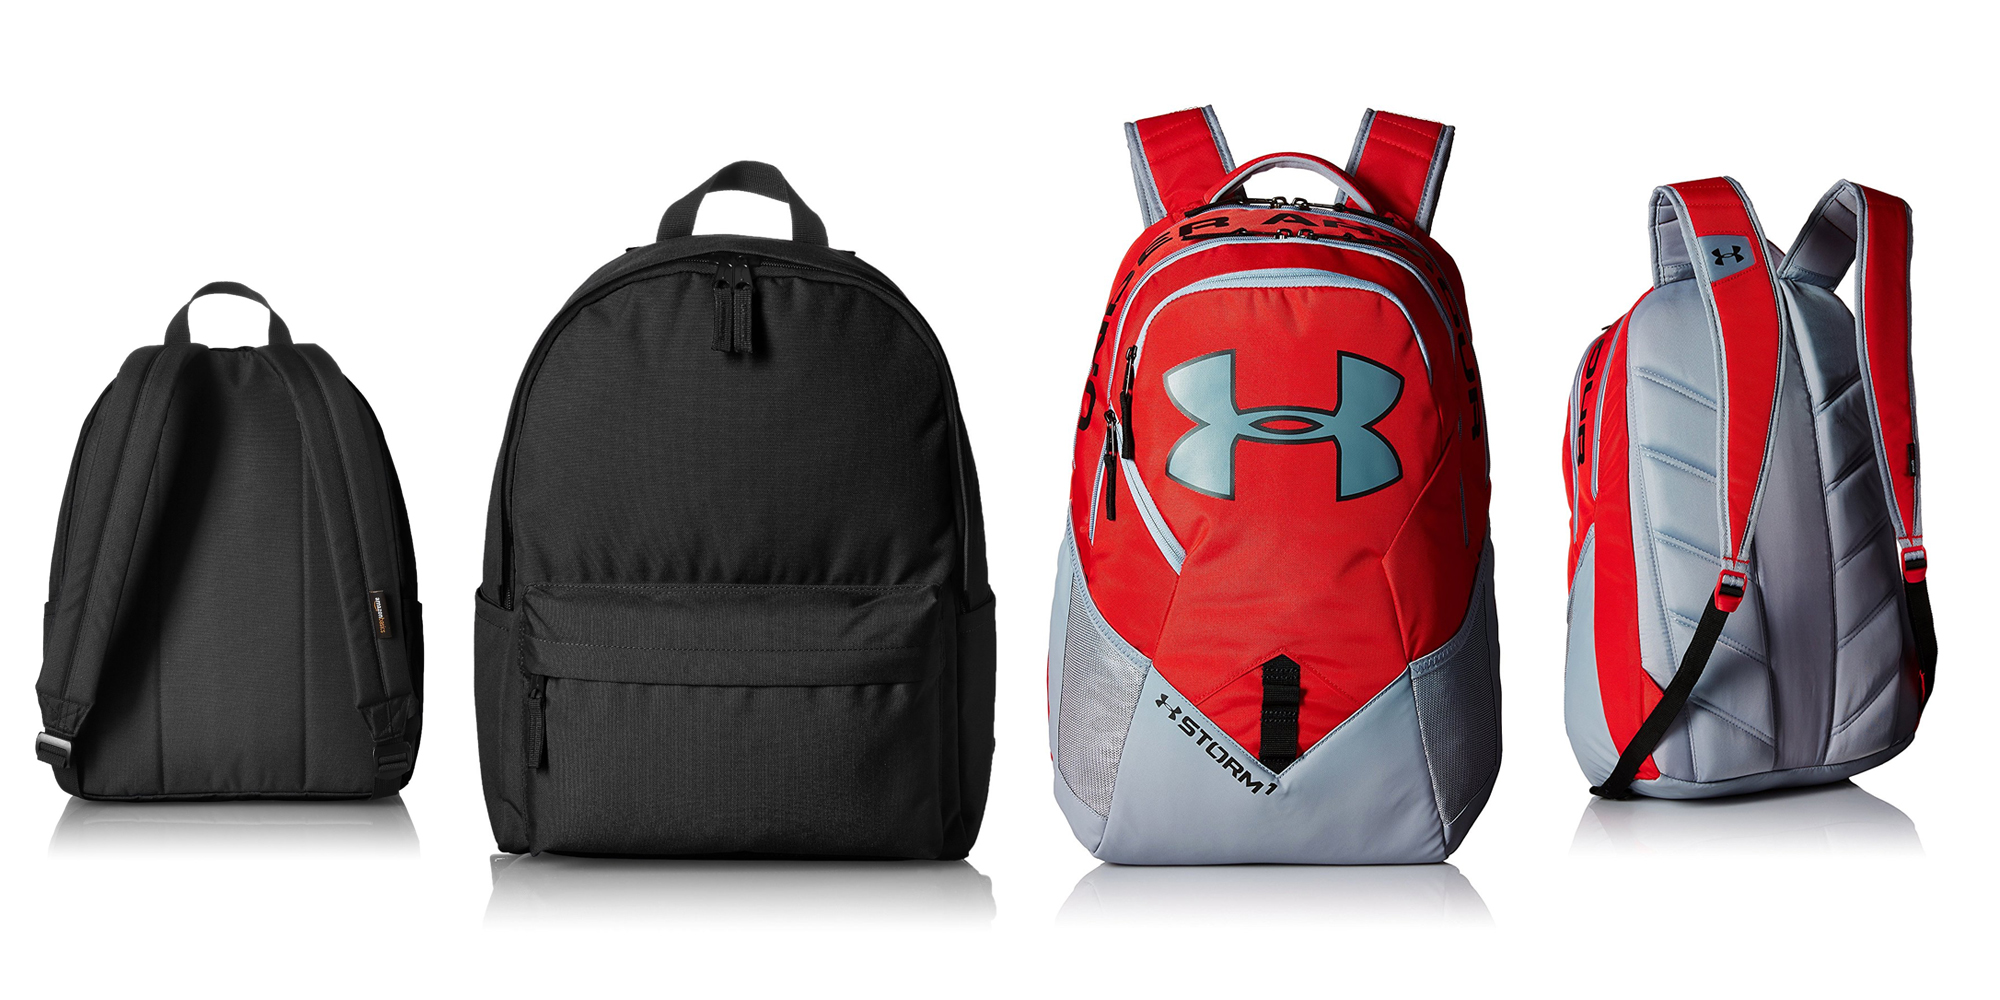 under armour backpack under $30